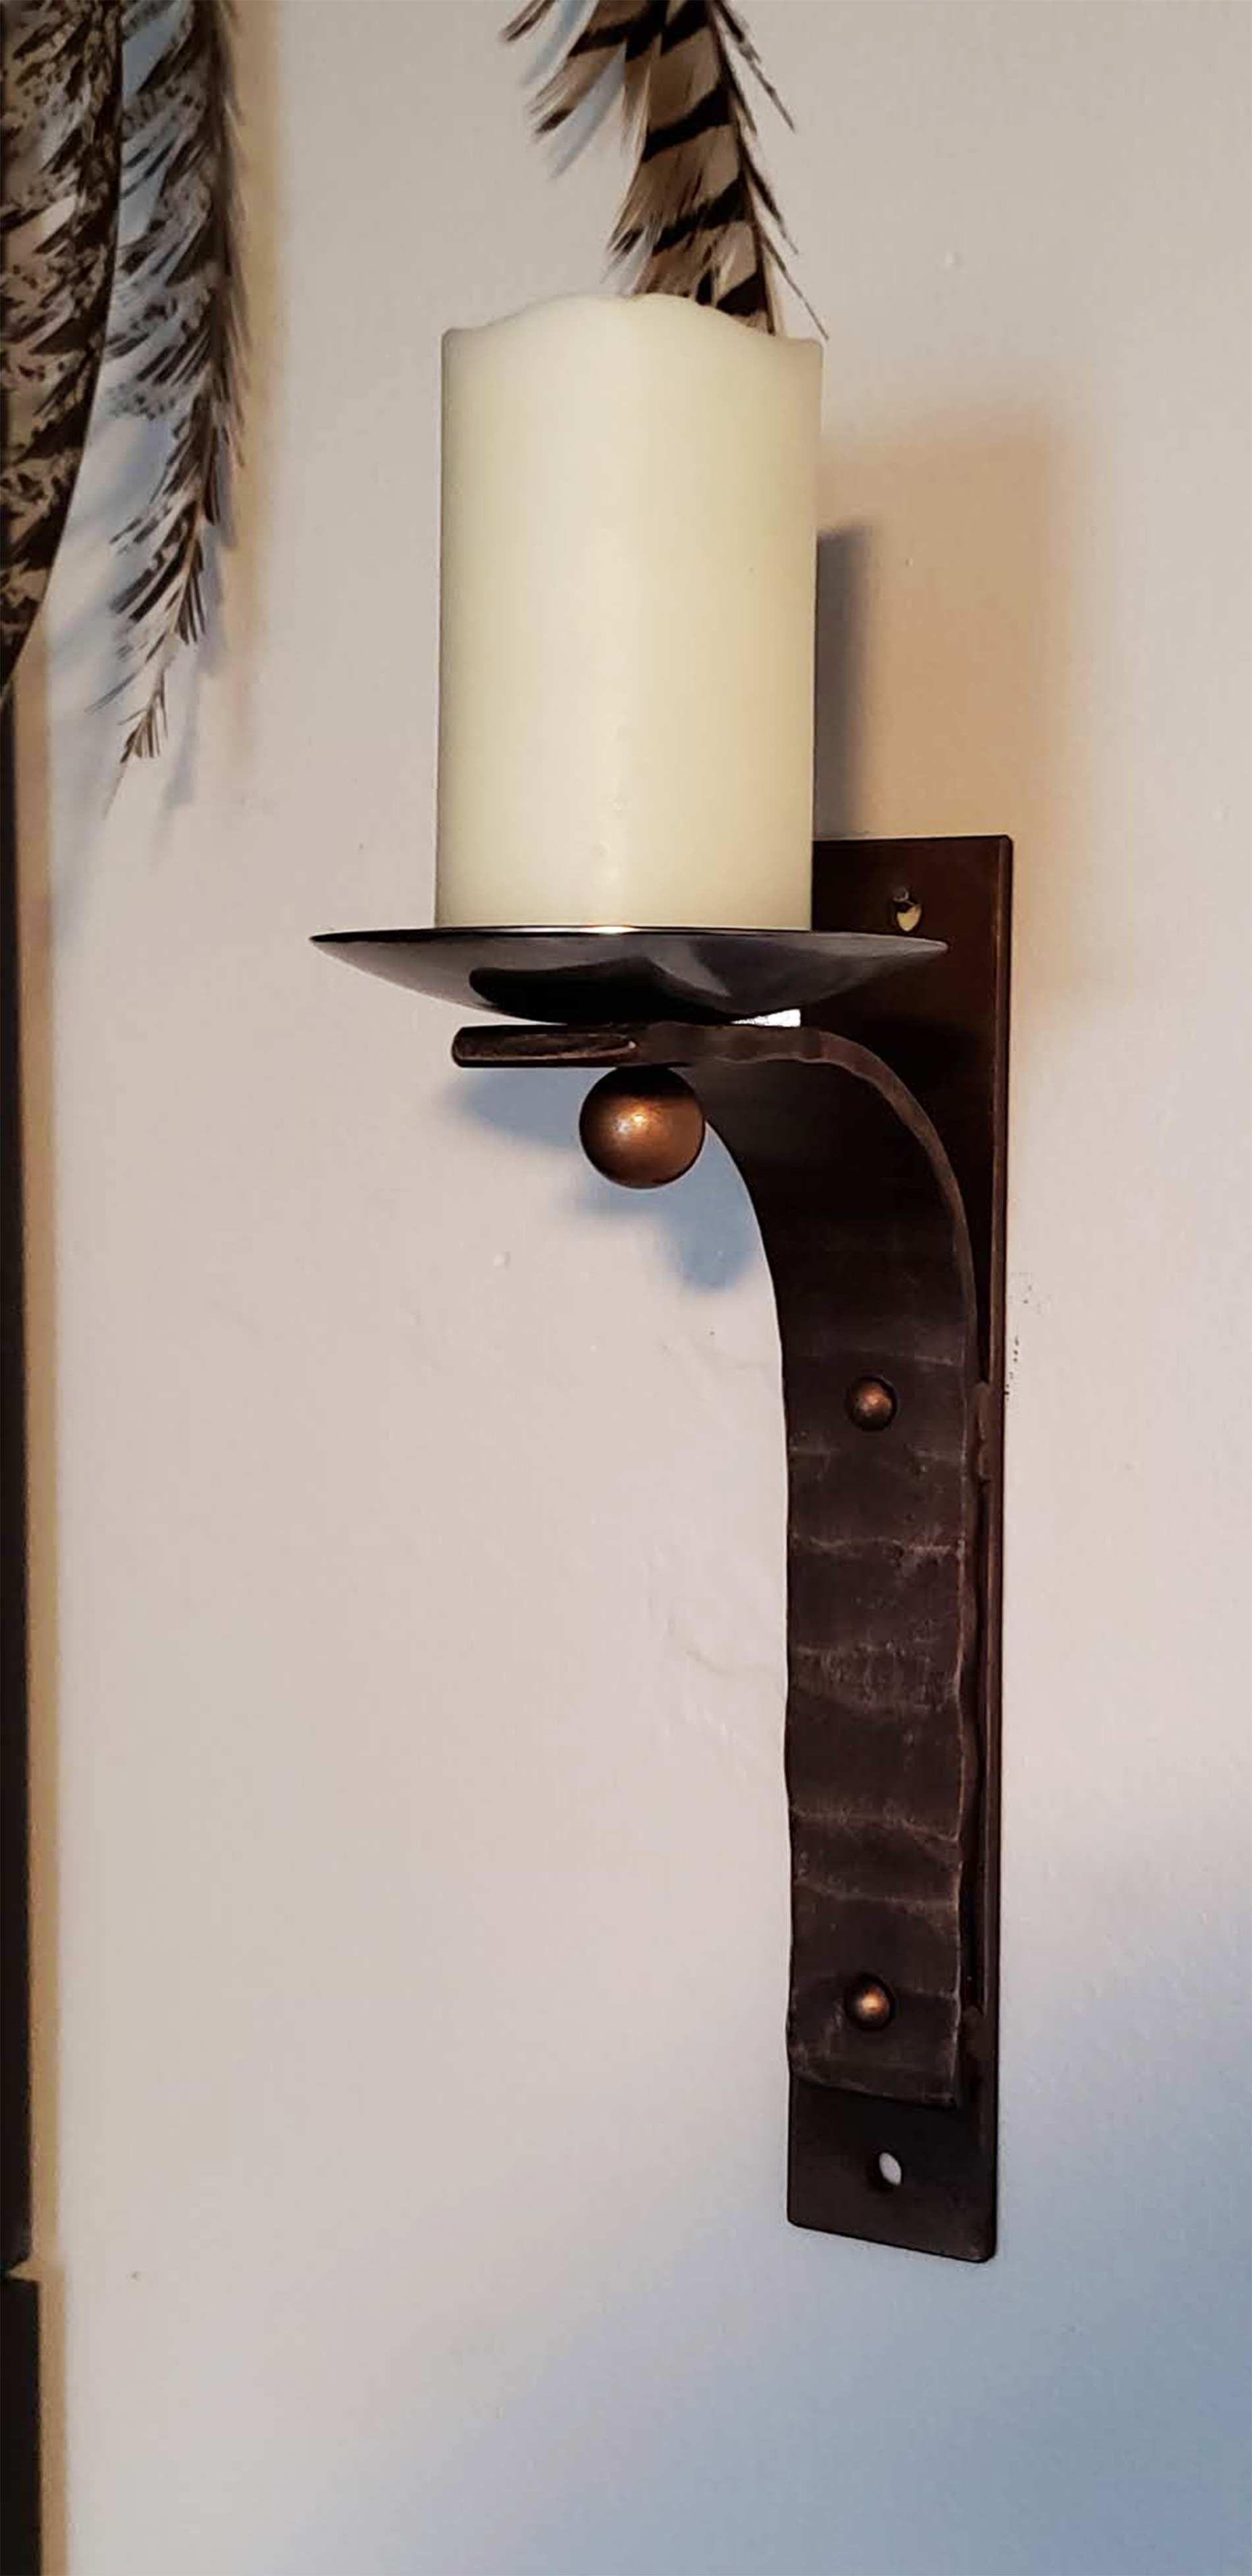 Stunning Wrought Iron Wall Candle Sconce-Handcrafted ... on Wrought Iron Wall Sconces id=57300